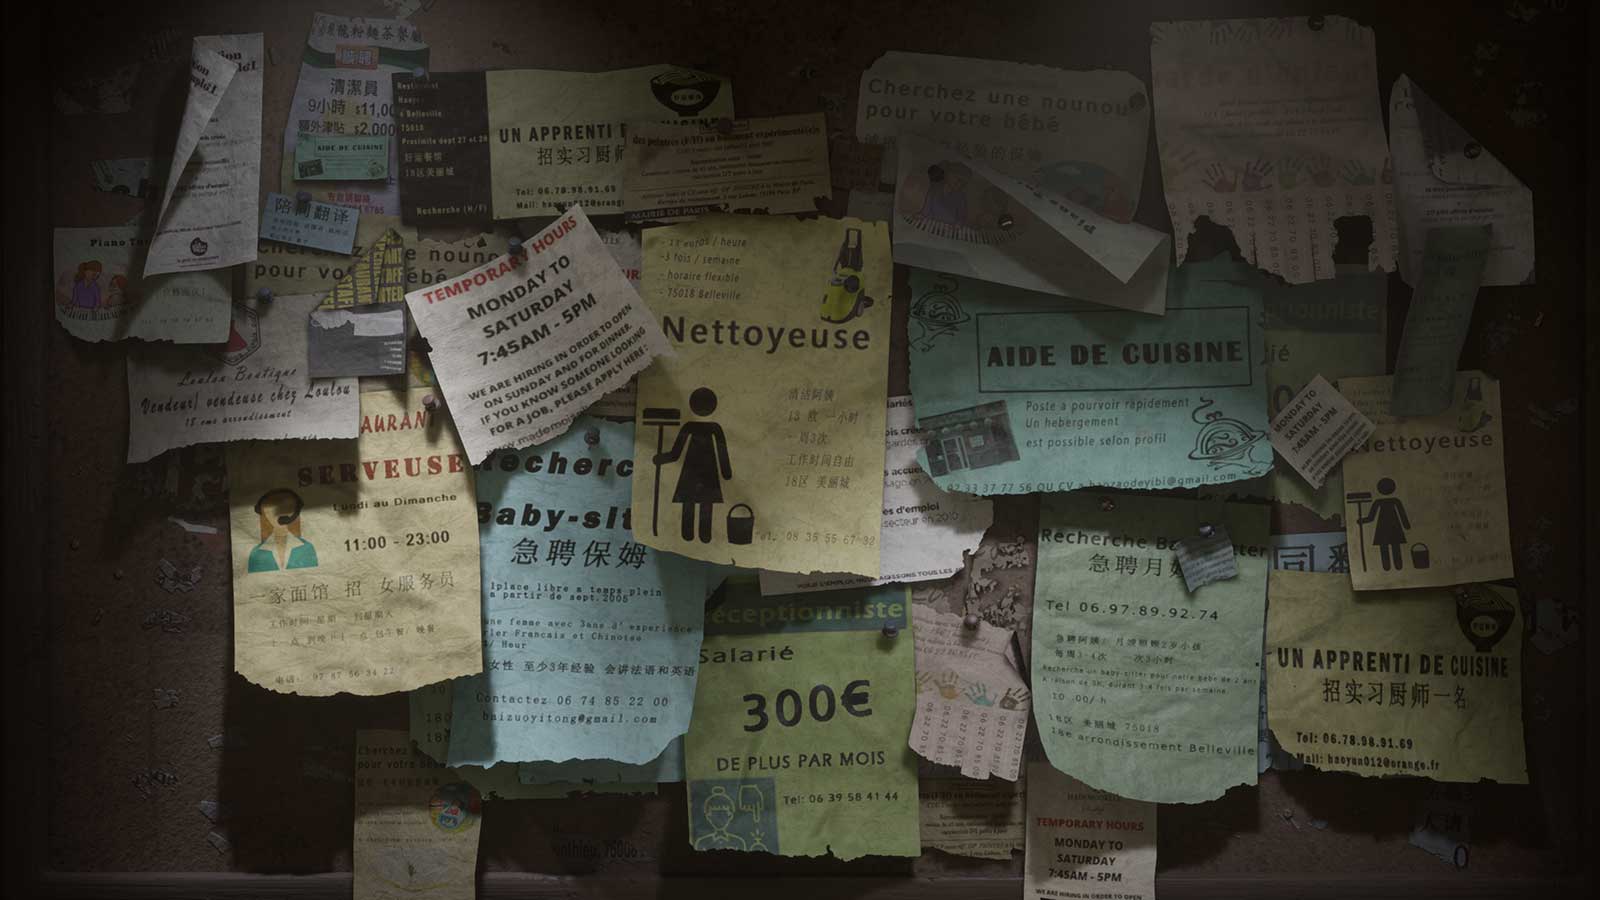 A bulletin board in the dark that advertises different services in French.